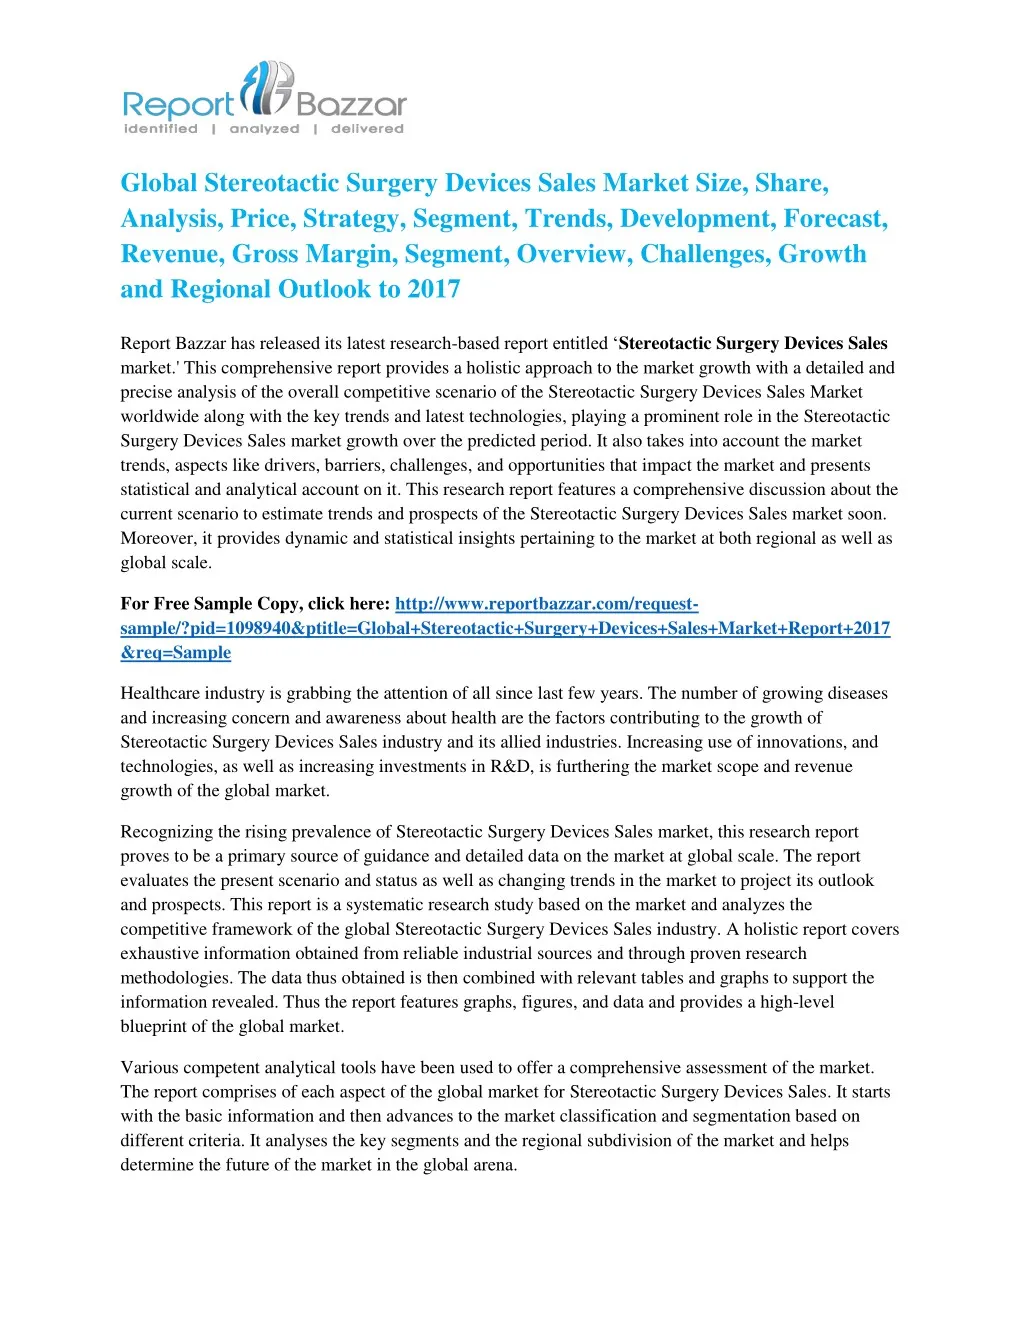 global stereotactic surgery devices sales market